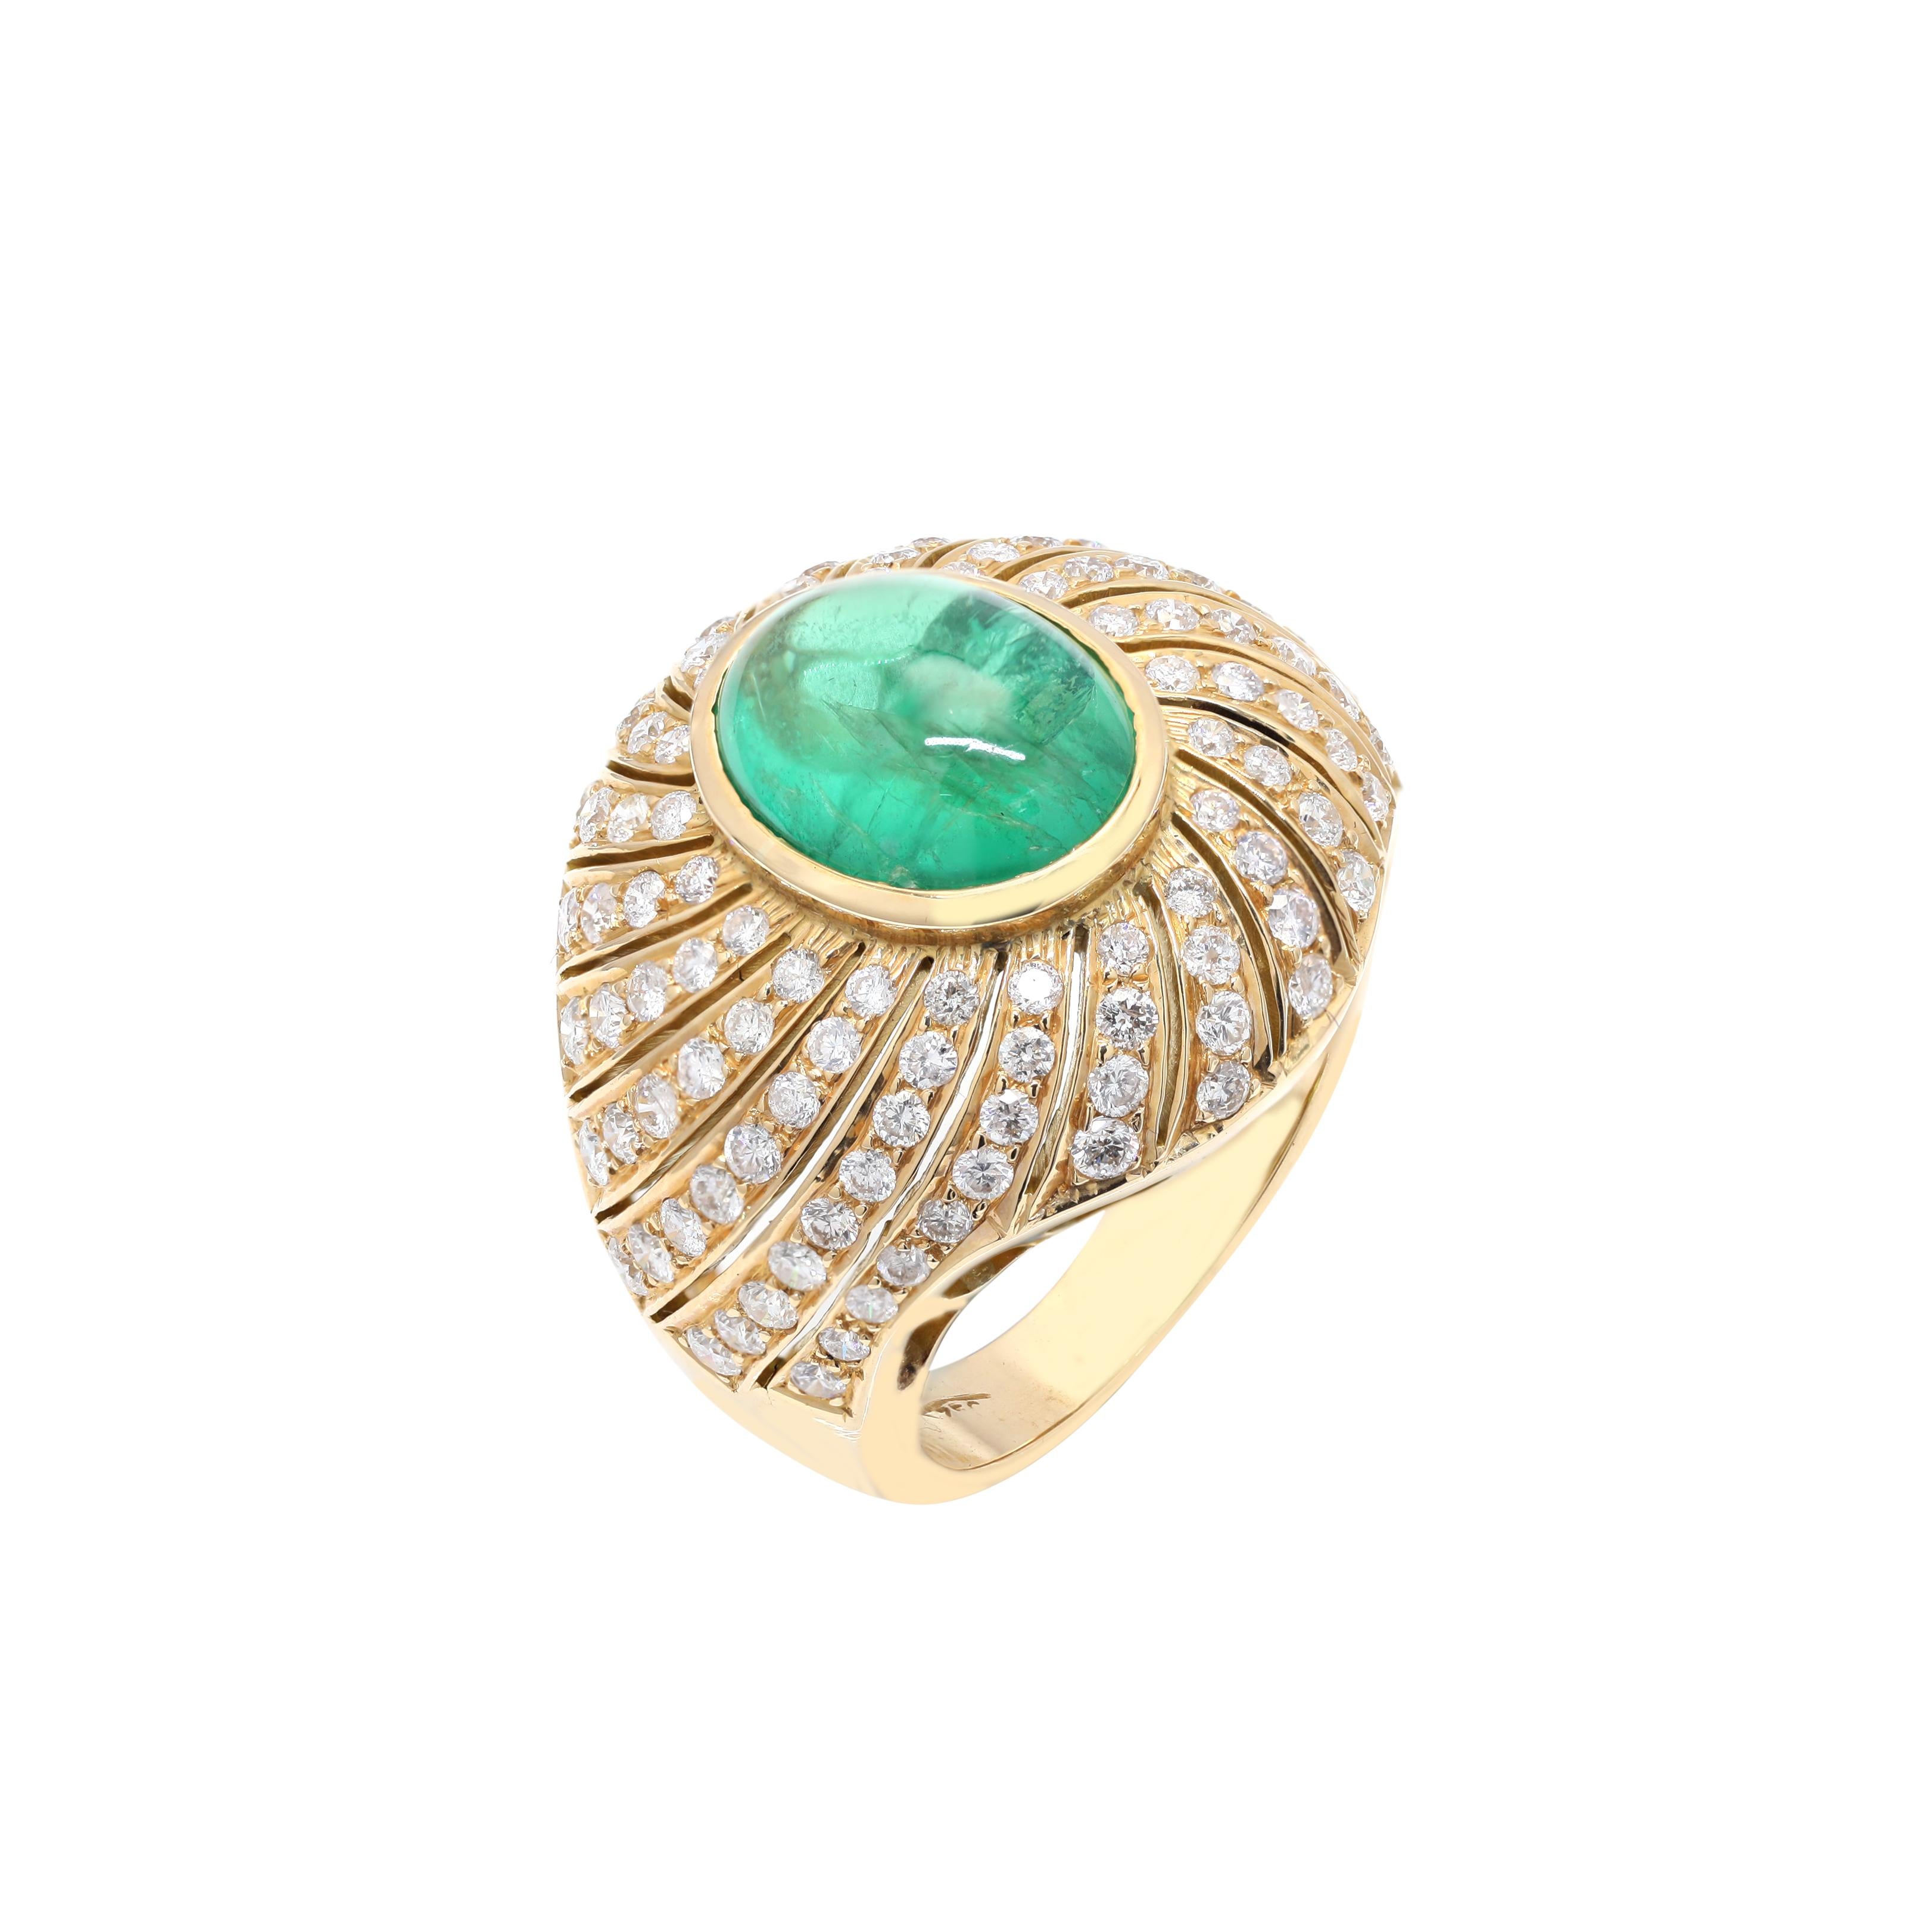 For Sale:  Mesmerizing 4.38 Carat Emerald Cocktail Ring with Diamonds in 18K Yellow Gold 4